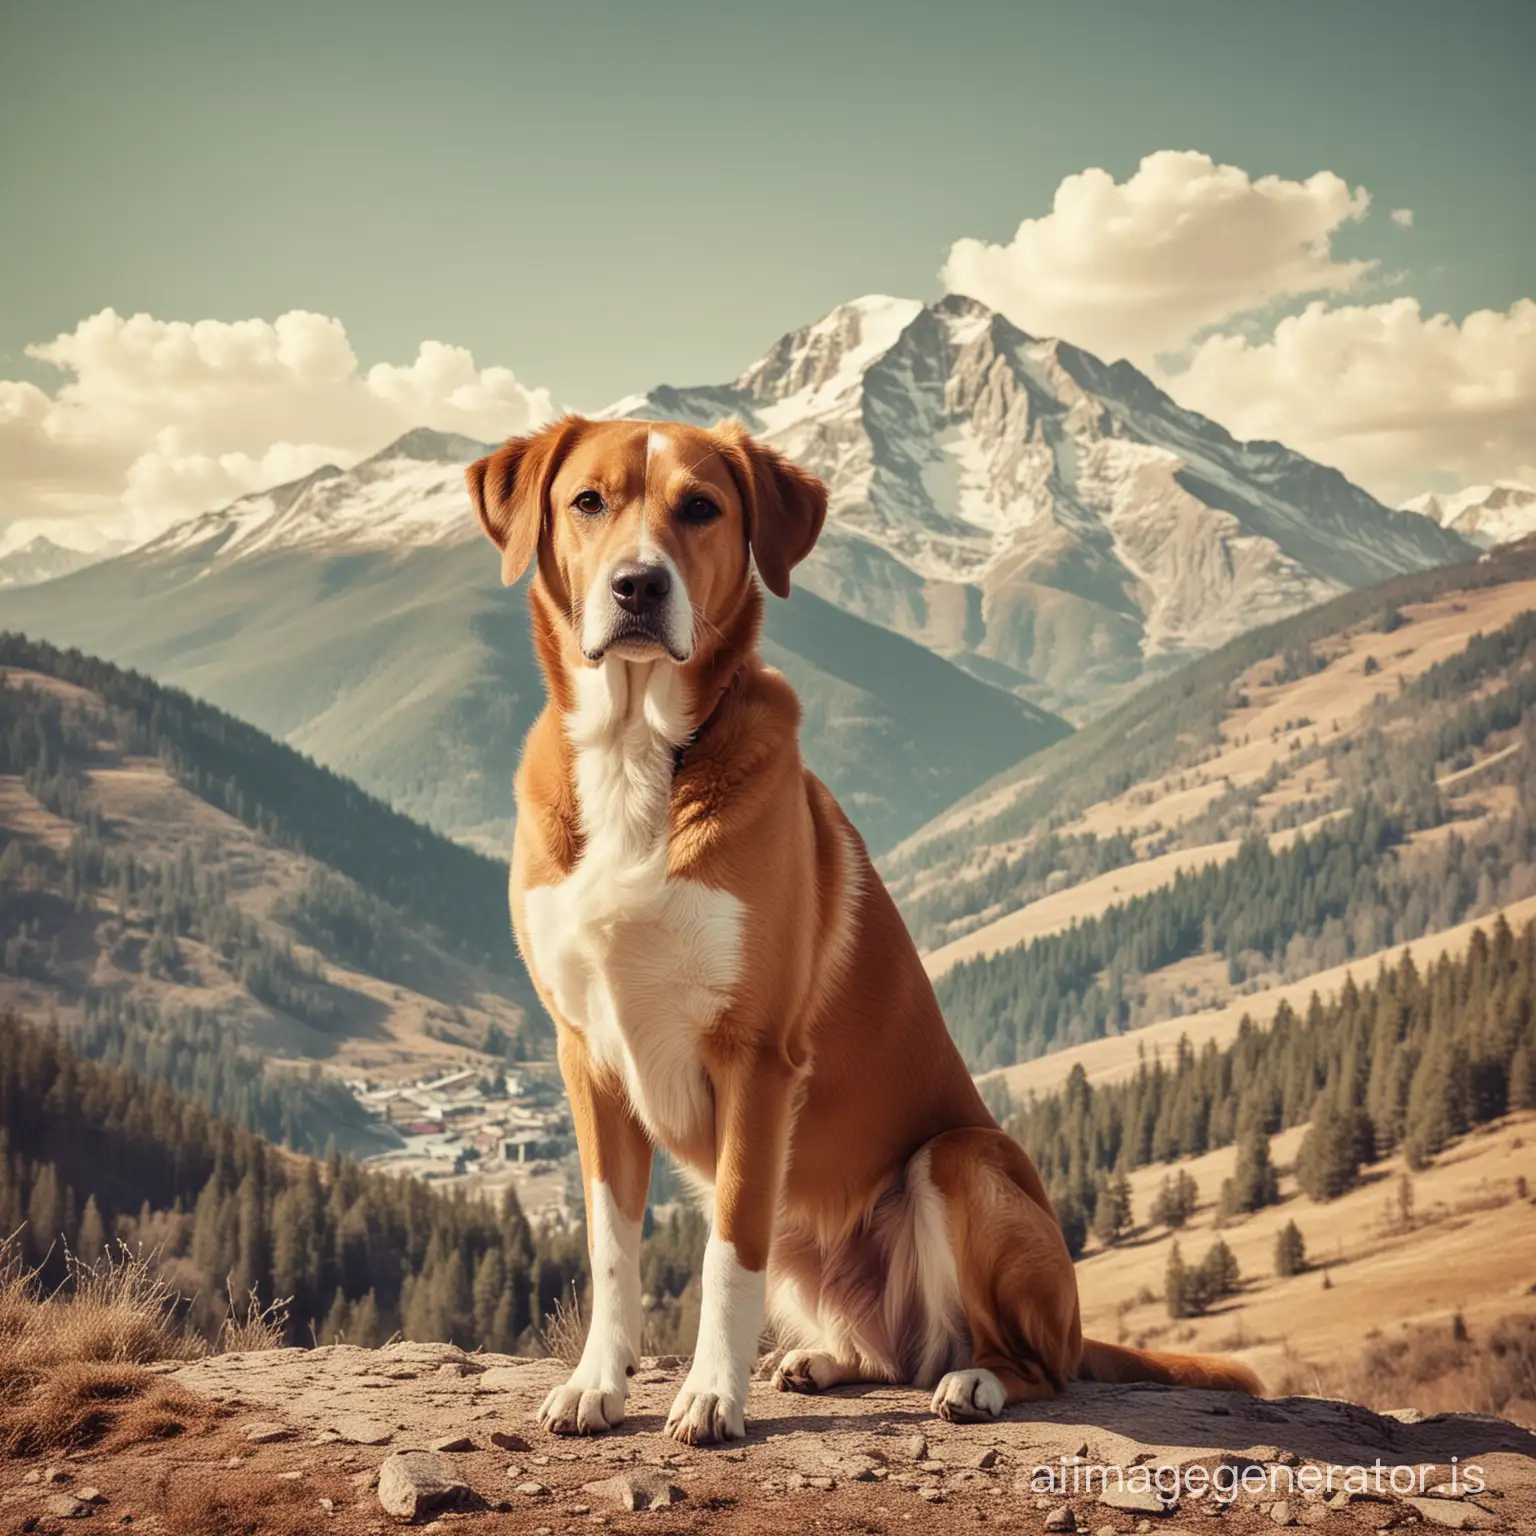 Dog with mountain behind retro image